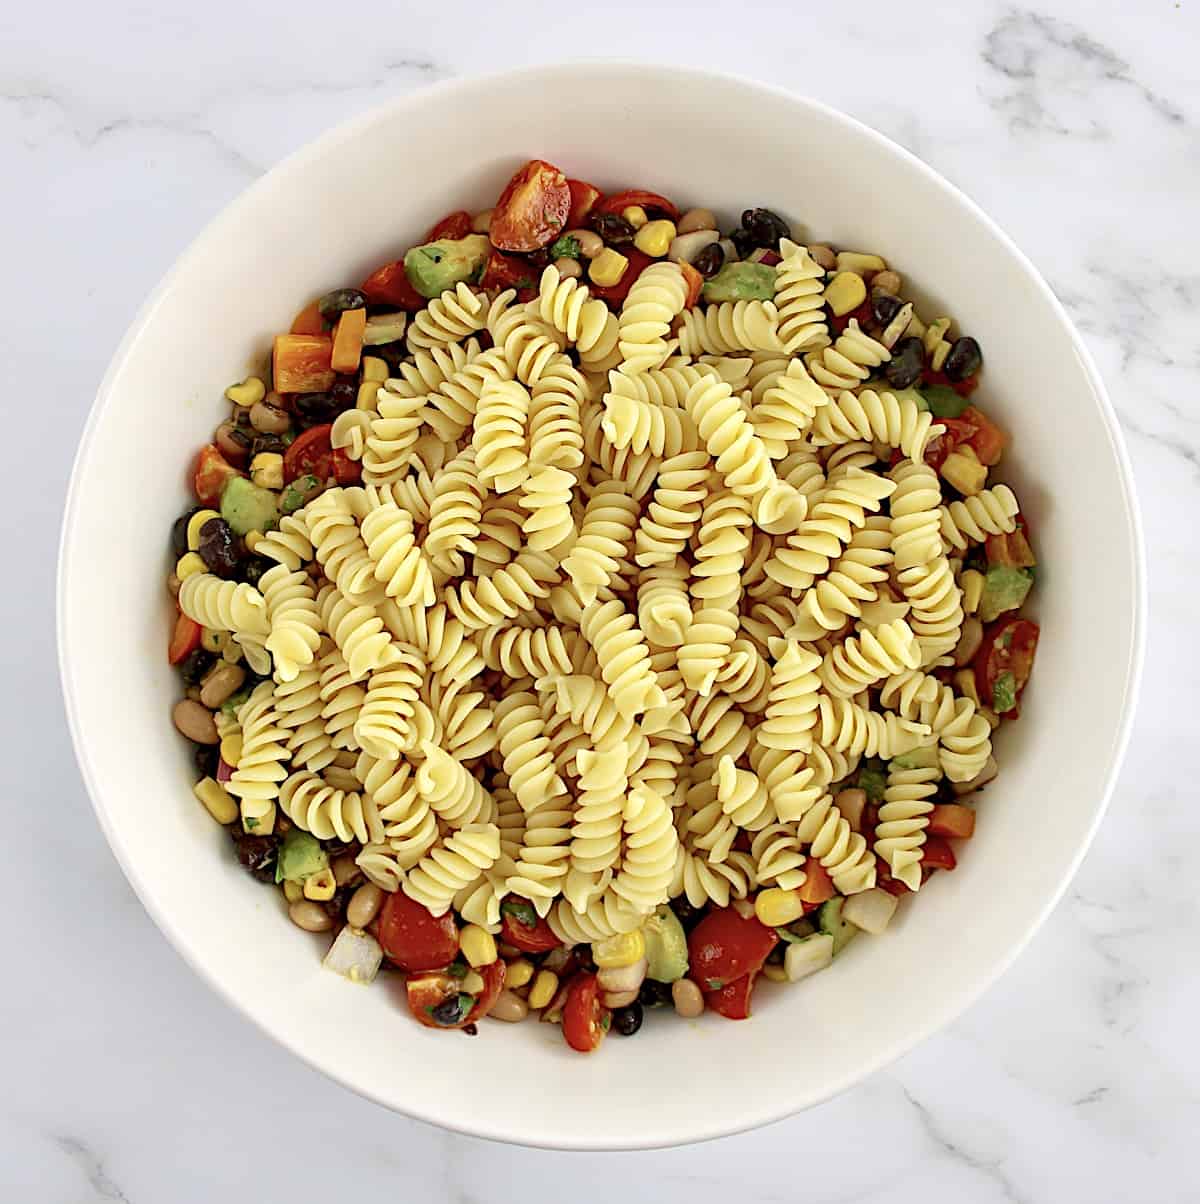 cooked rontini pasta over cowboy caviar